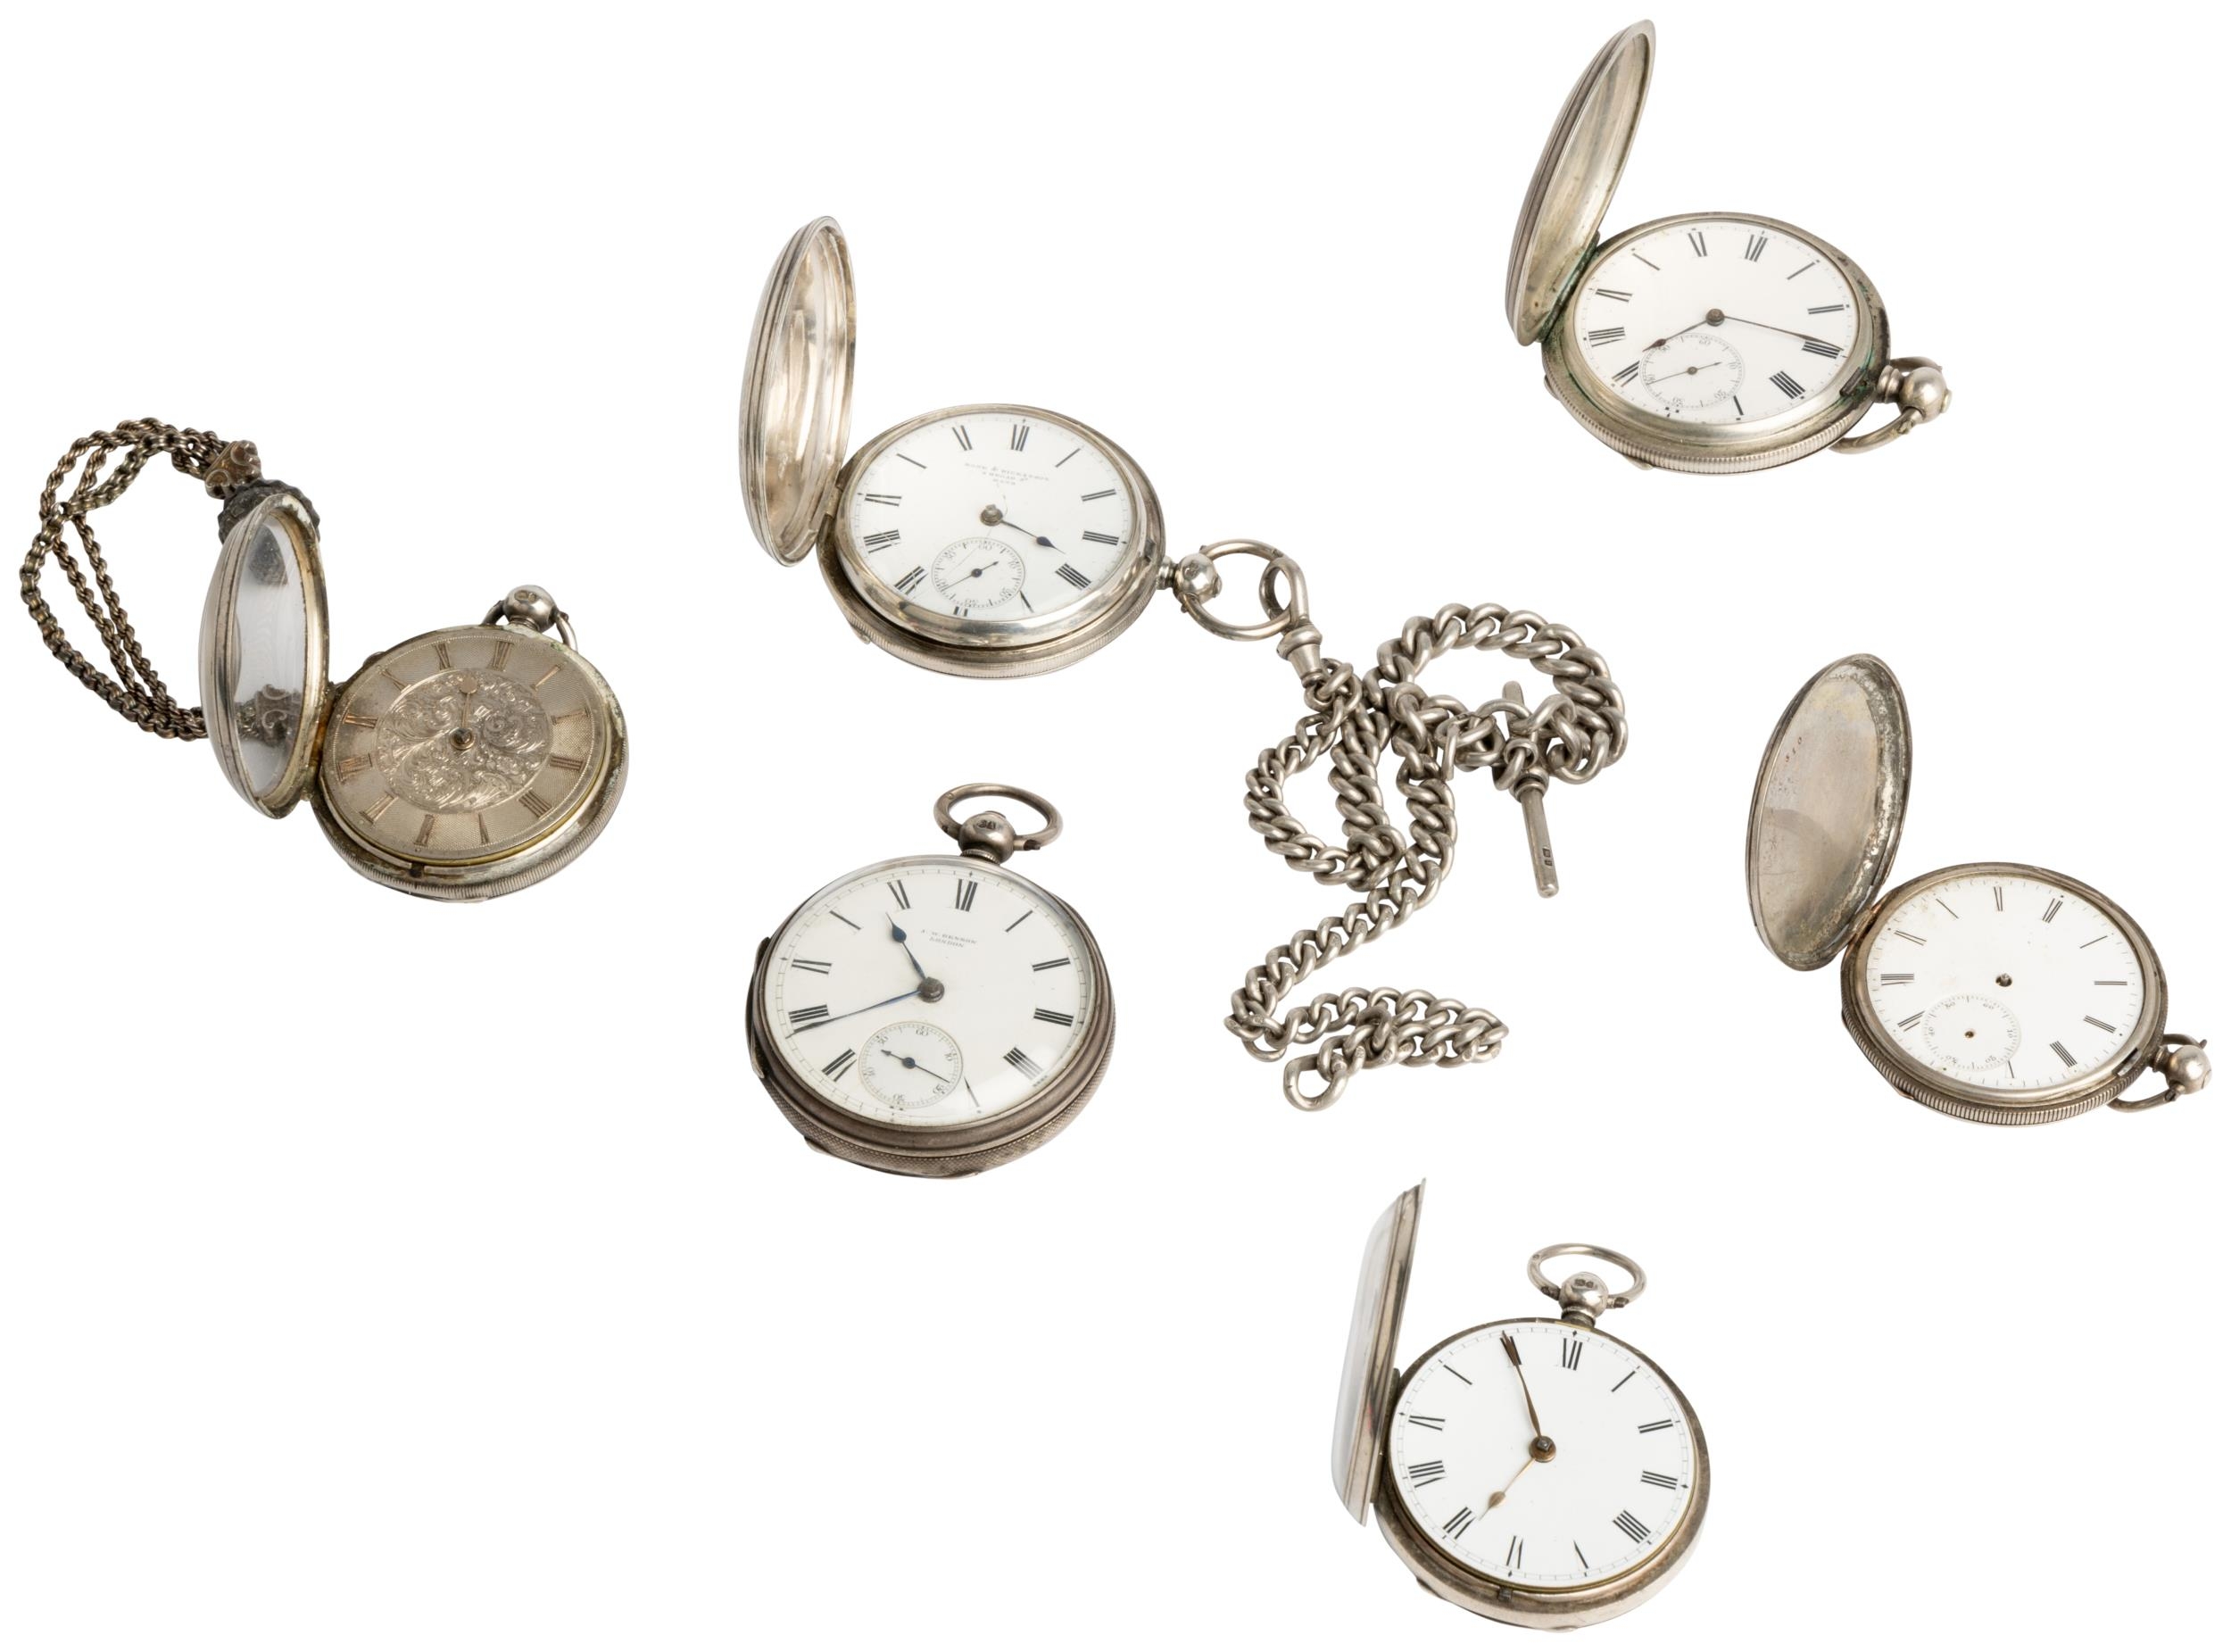 SIX VARIOUS SILVER WATCHES. 3 hunting cased, 3 open faced and 2 chains. (6) - Image 3 of 3